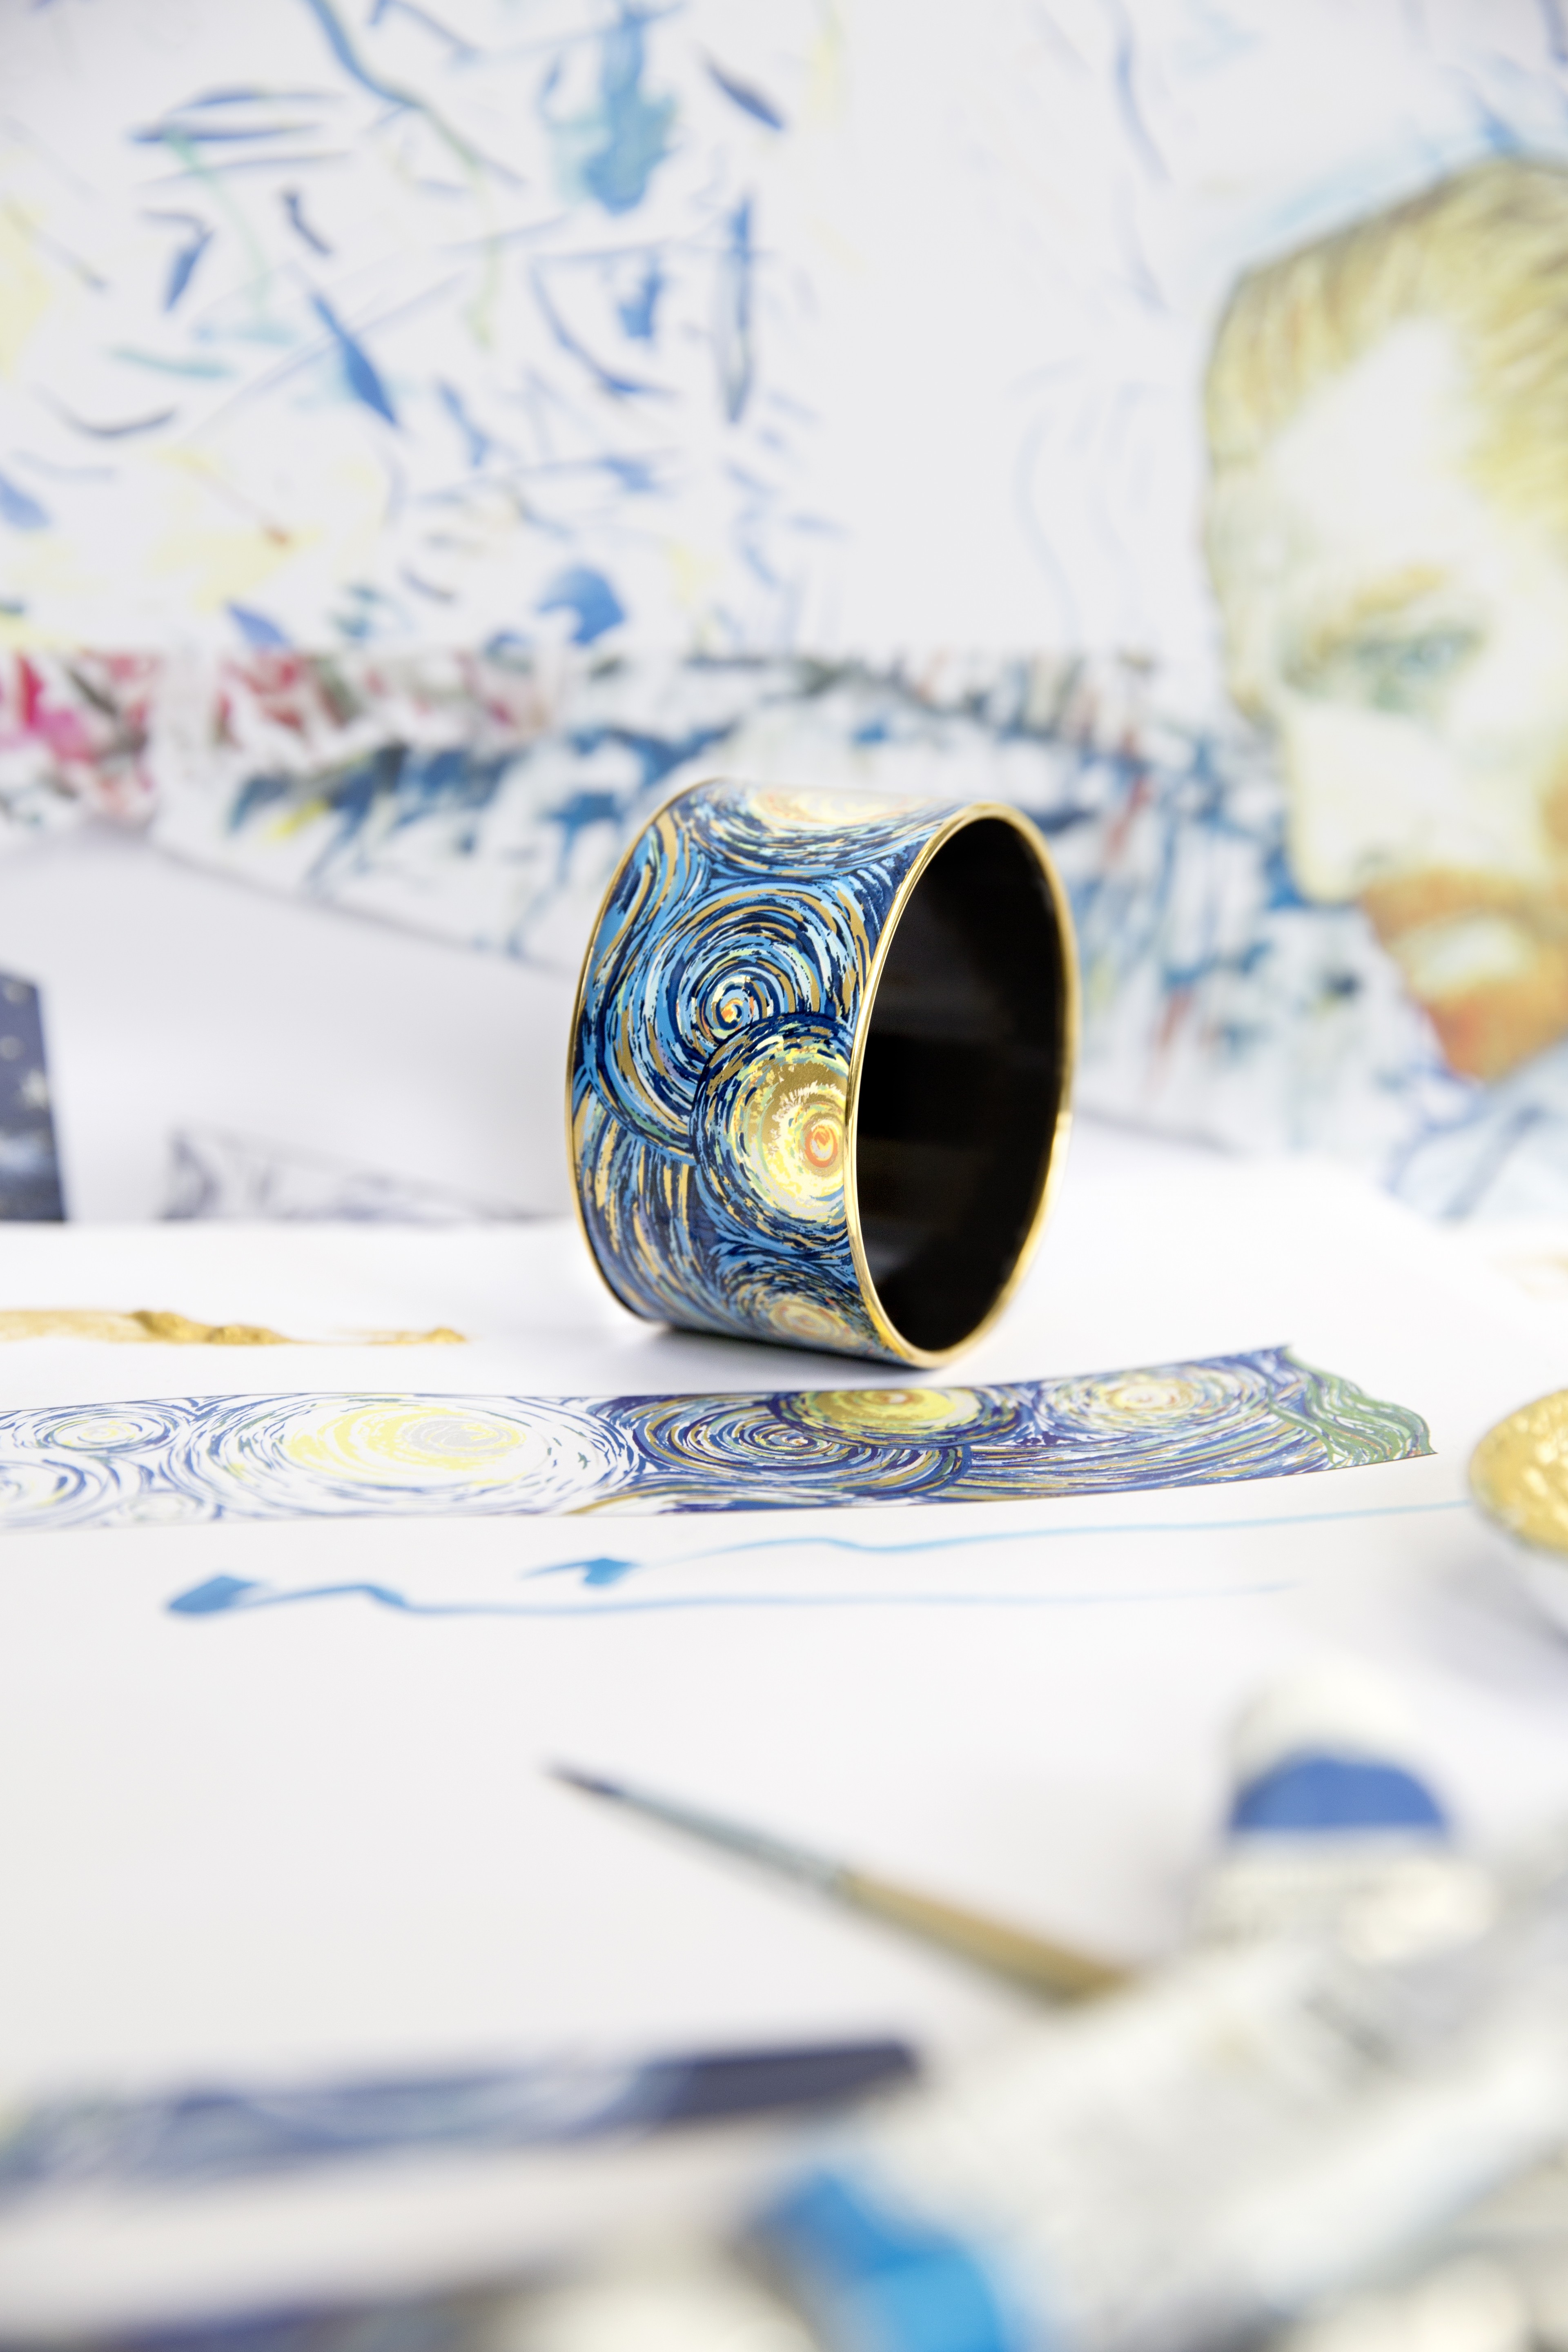 A bangle, inspired by Vincent van Gogh’s ‘The Starry Night’, which forms part of FREYWILLE’s new jewellery collection, Hommage à Van Gogh.